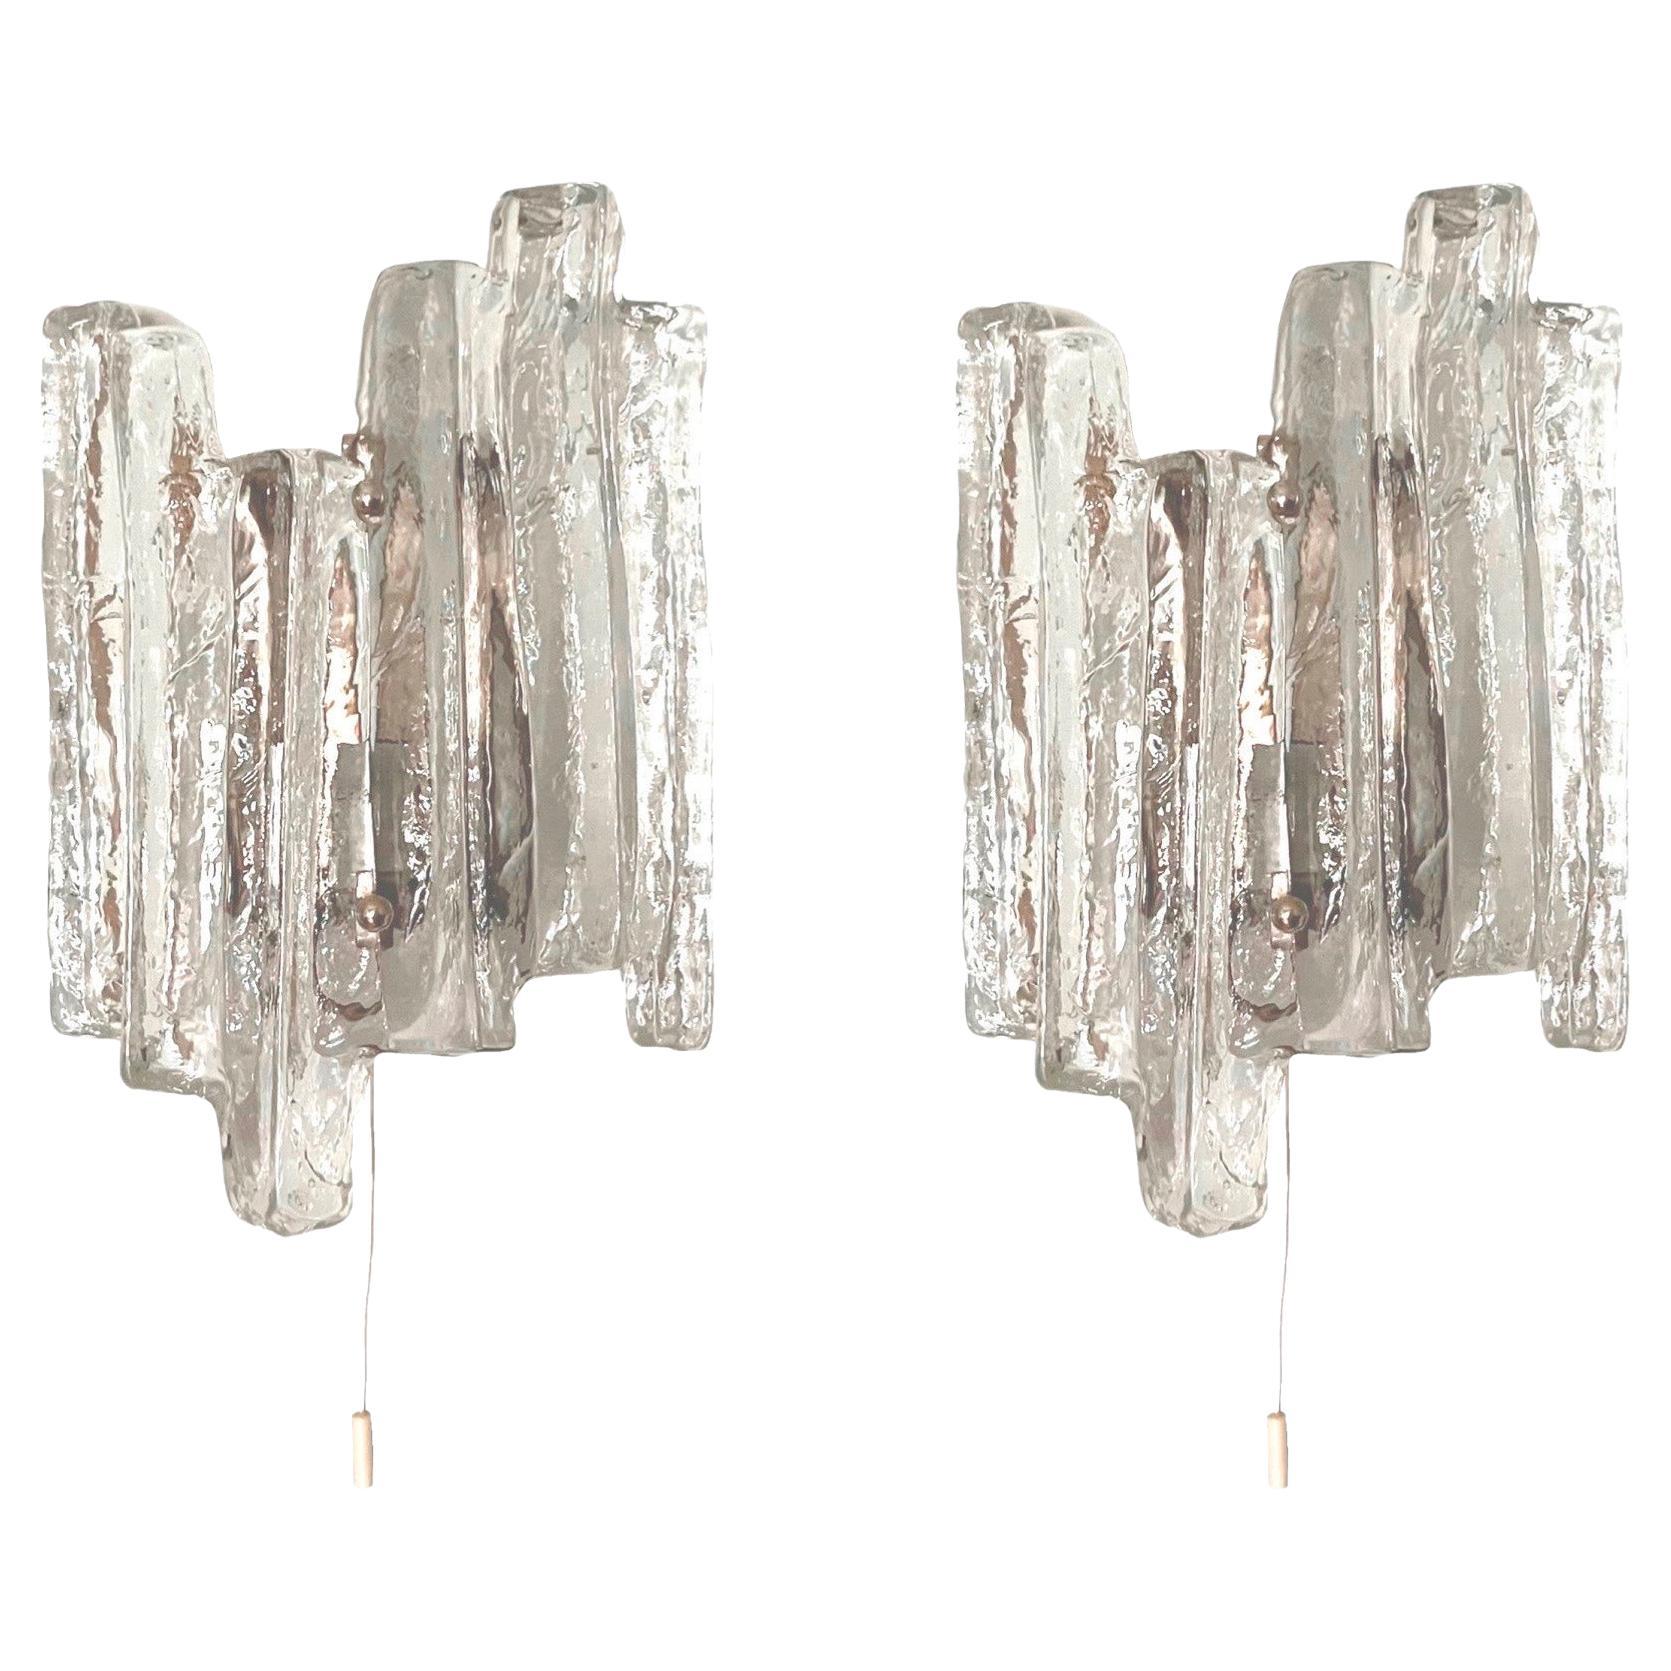 Austrian Midcentury Pair of Ice-Glass Wall Sconces by Kalmar, 1970s